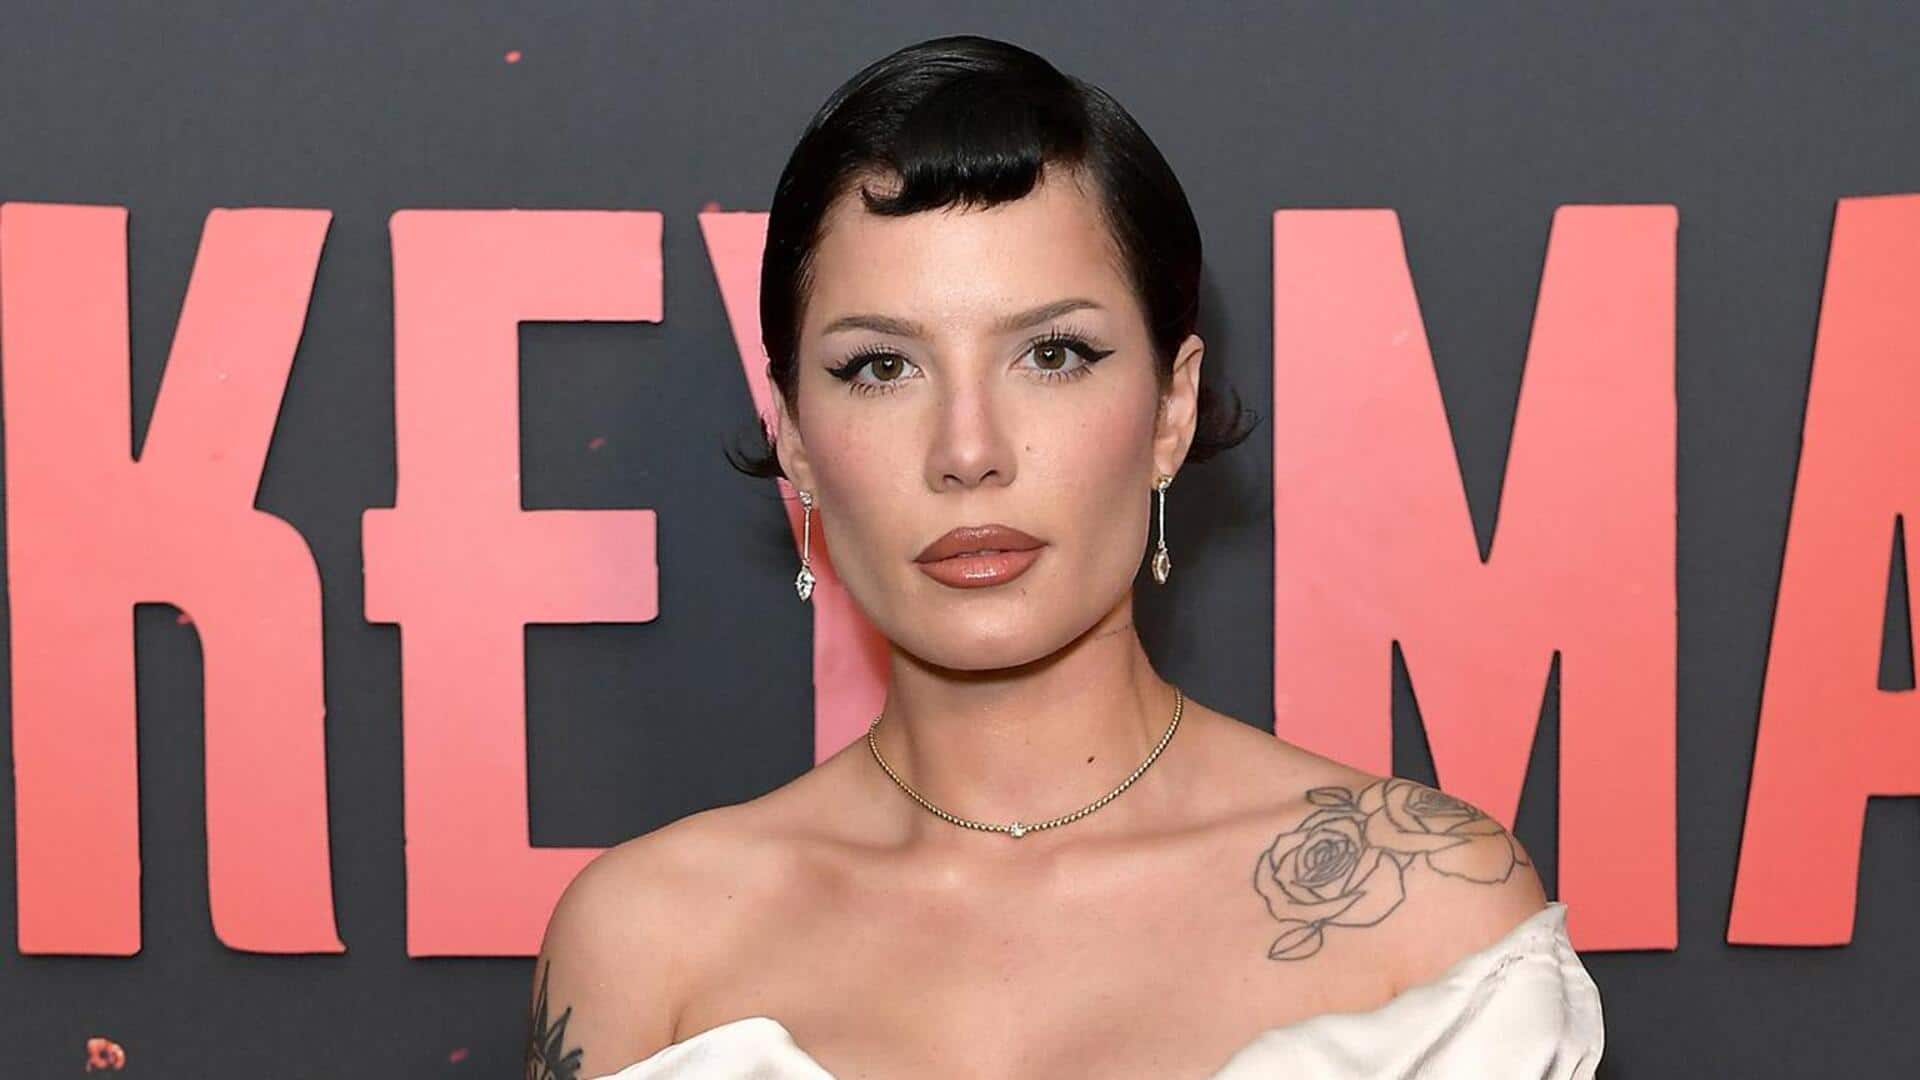 Halsey shares ongoing health struggles, feels 'lucky to be alive'